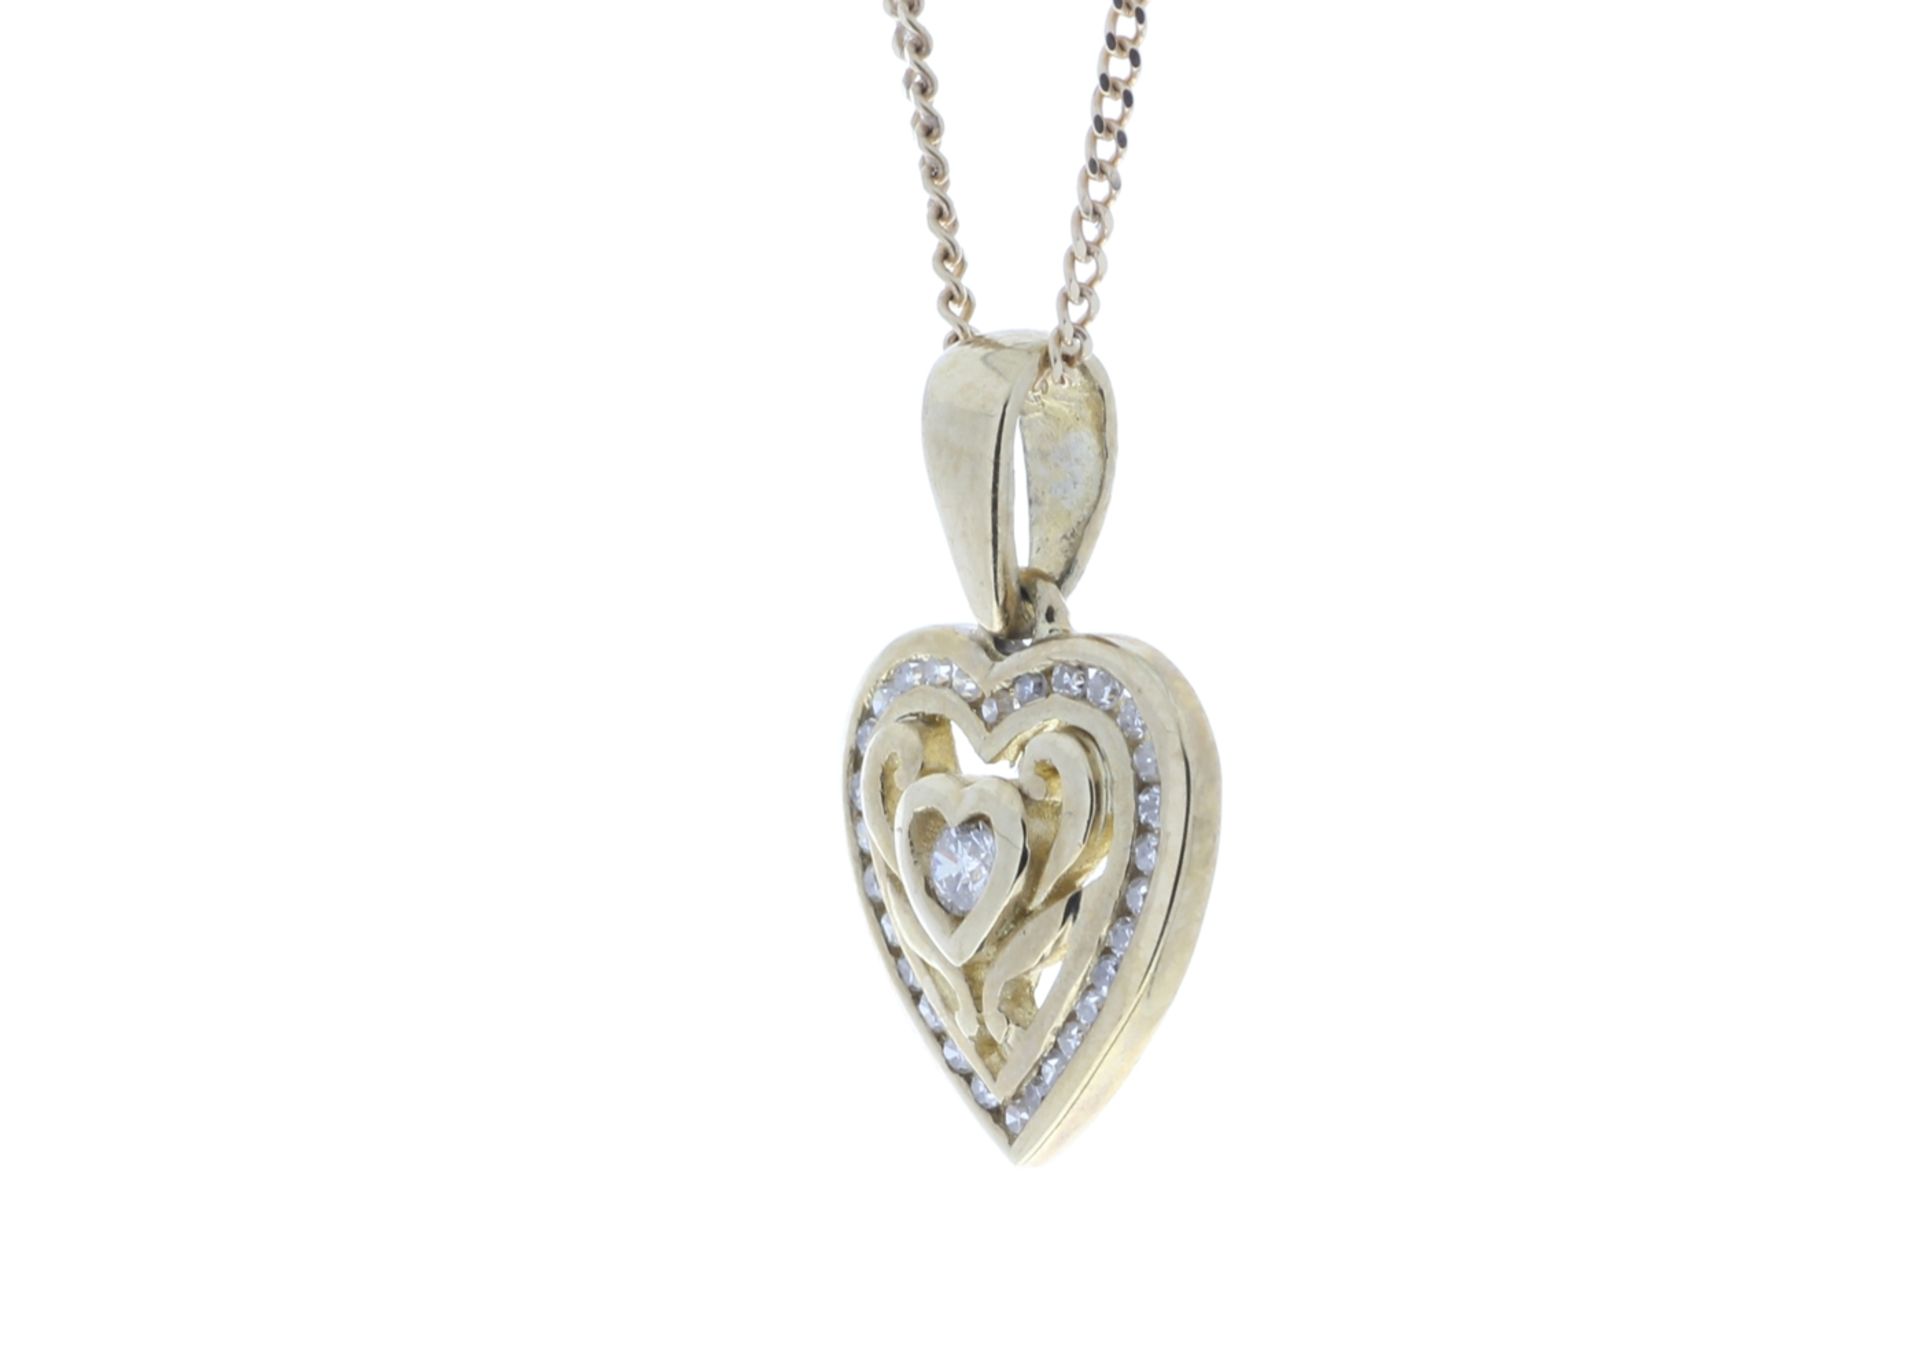 9ct Yellow Gold Heart Pendant Set With Diamonds With Centre Heart and Swirls 0.18 Carats - Image 4 of 4